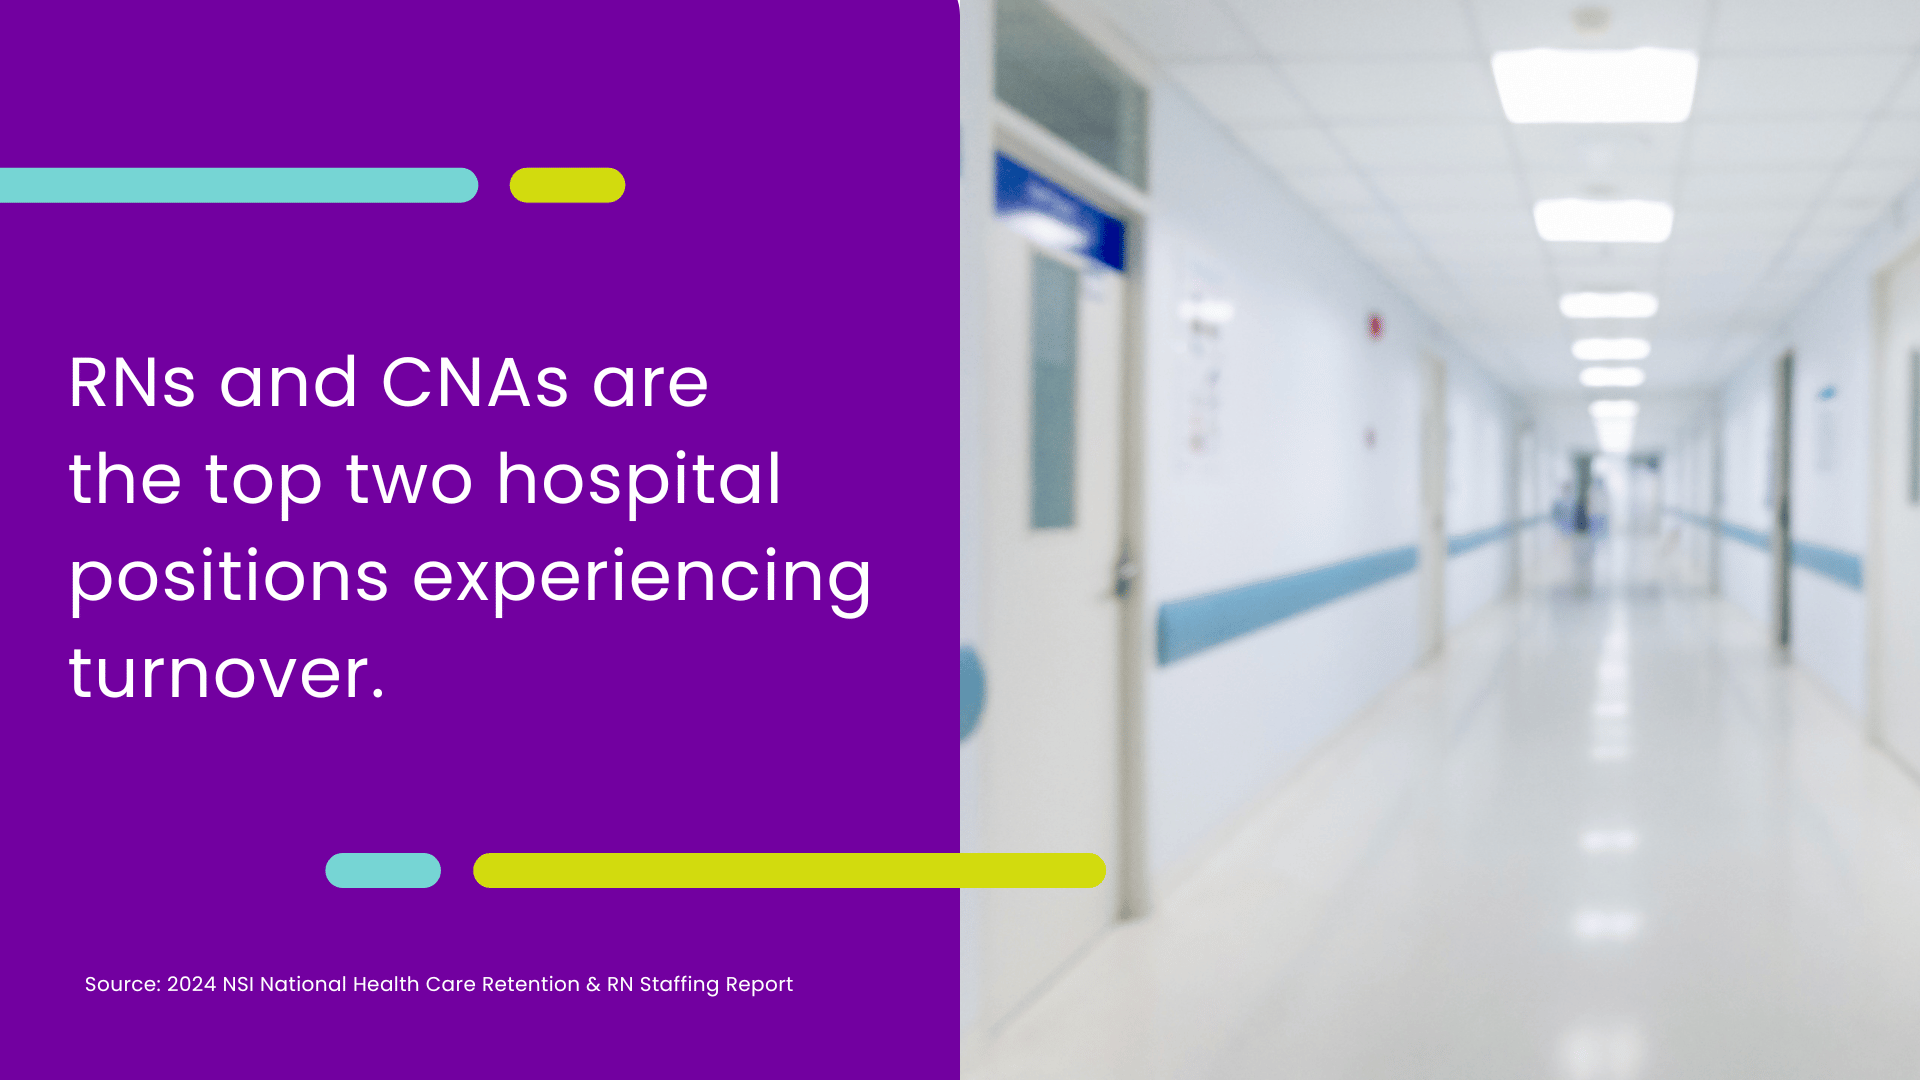 An image of an empty hospital hallway, with text that says RNs and CNAs are the top two hospital positions experiencing turnover.